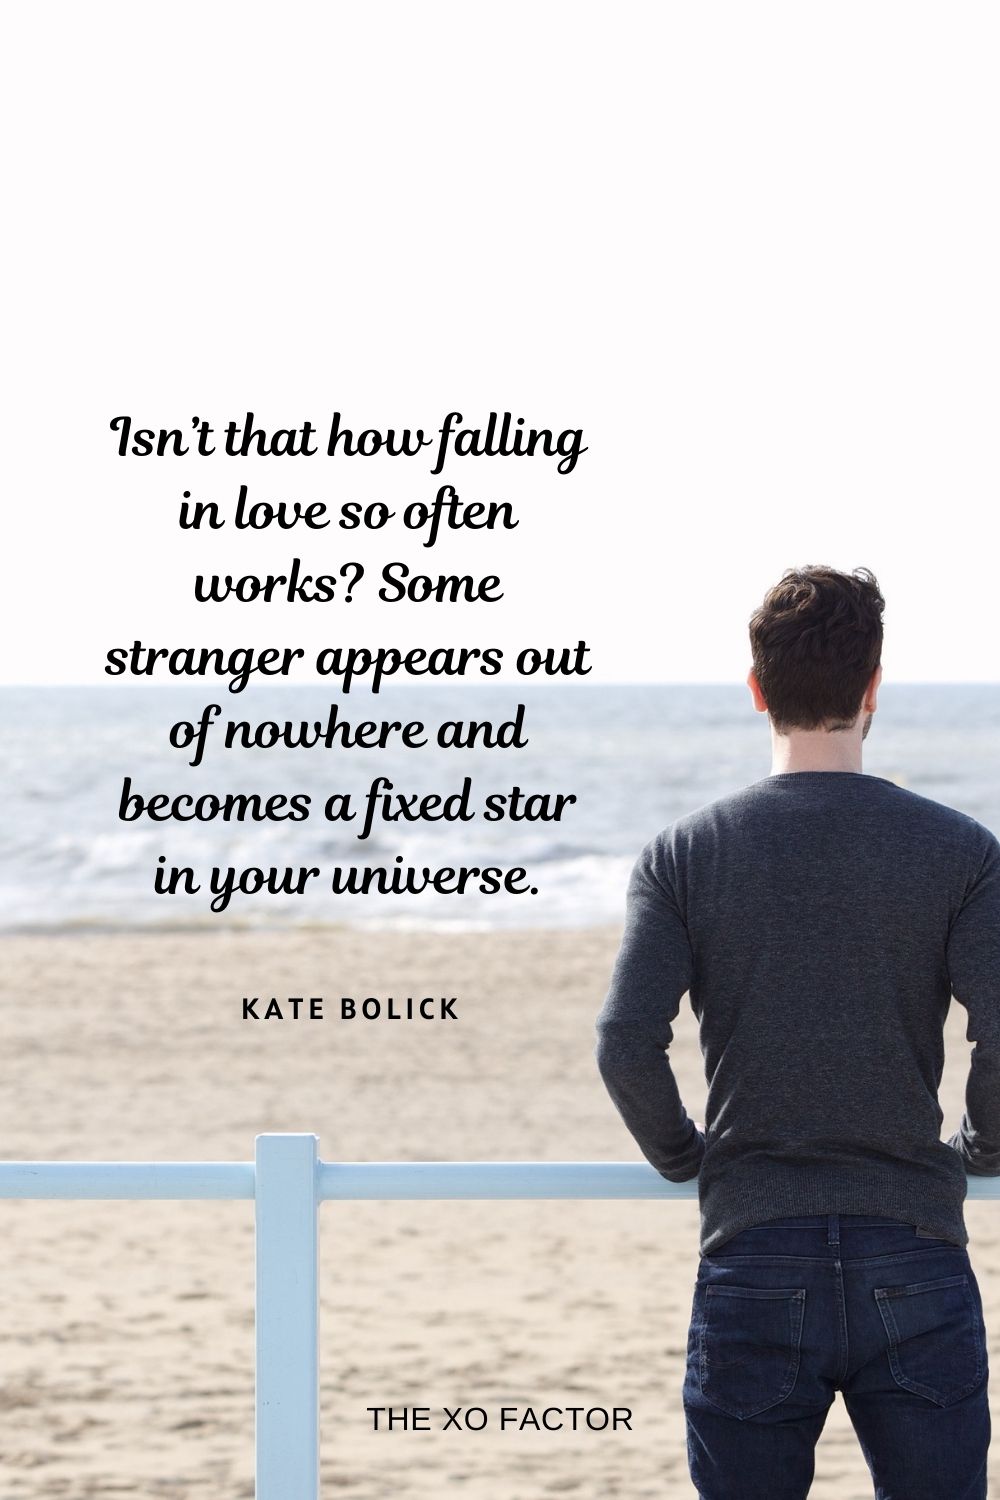 Isn’t that how falling in love so often works? Some stranger appears out of nowhere and becomes a fixed star in your universe. Kate Bolick